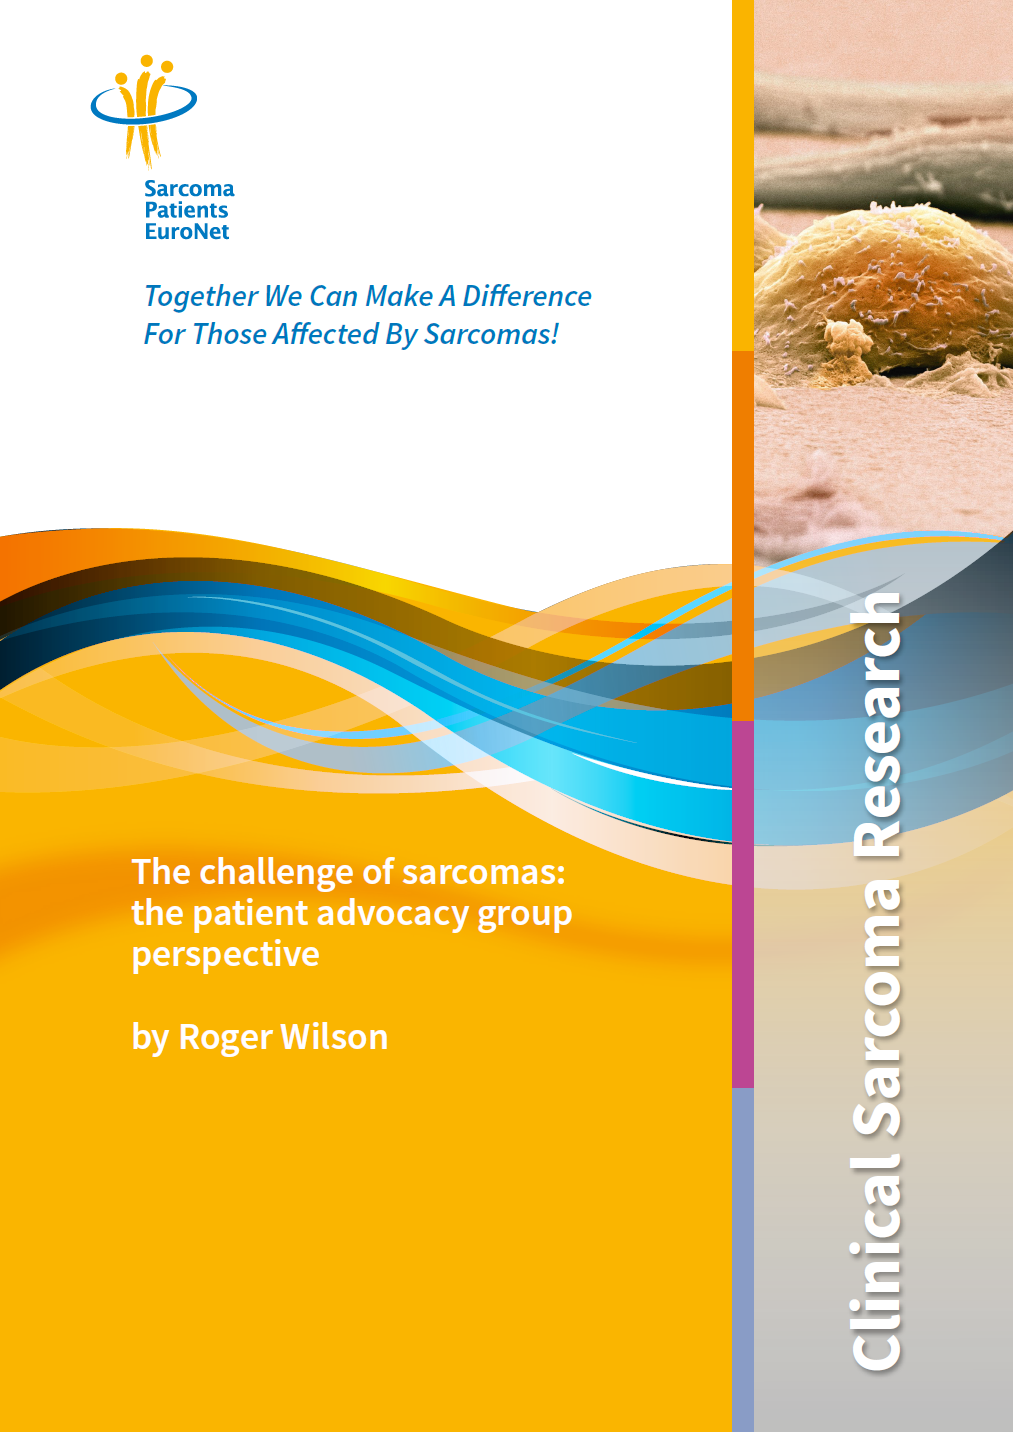 2020 02 06 12 27 12 SPAEN Sarcoma Clinical Research Paper 2019 The challenge of sarcomas Webpdf A